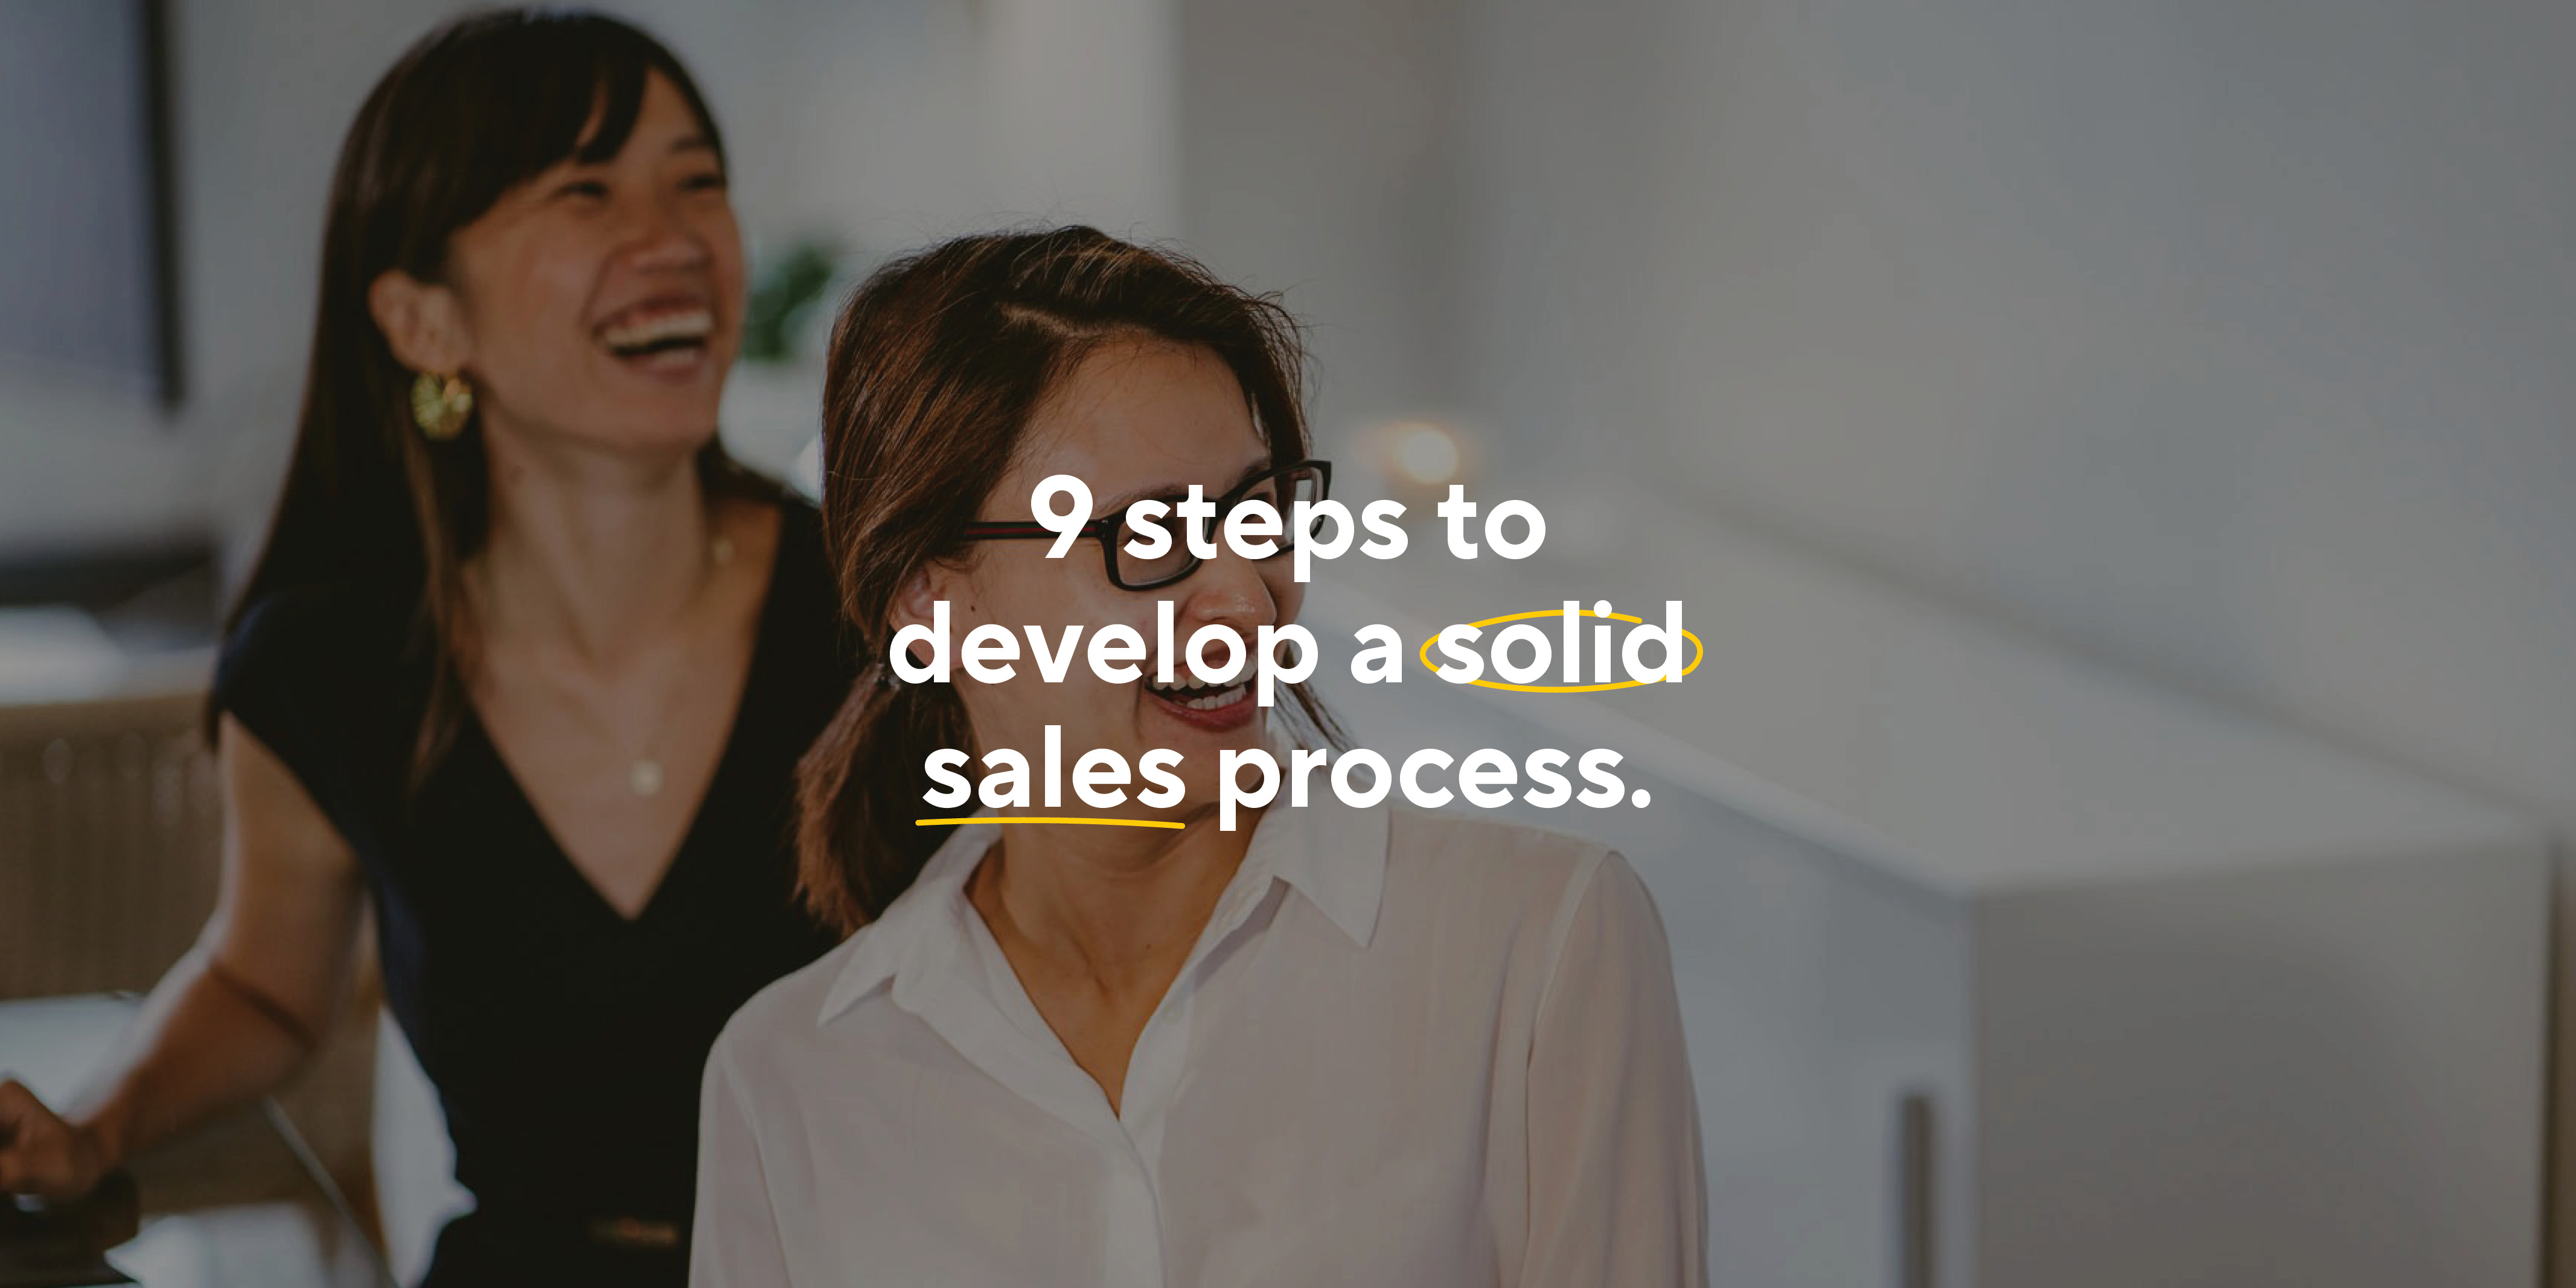 How To Develop A Solid Sales Process For Your Small Business